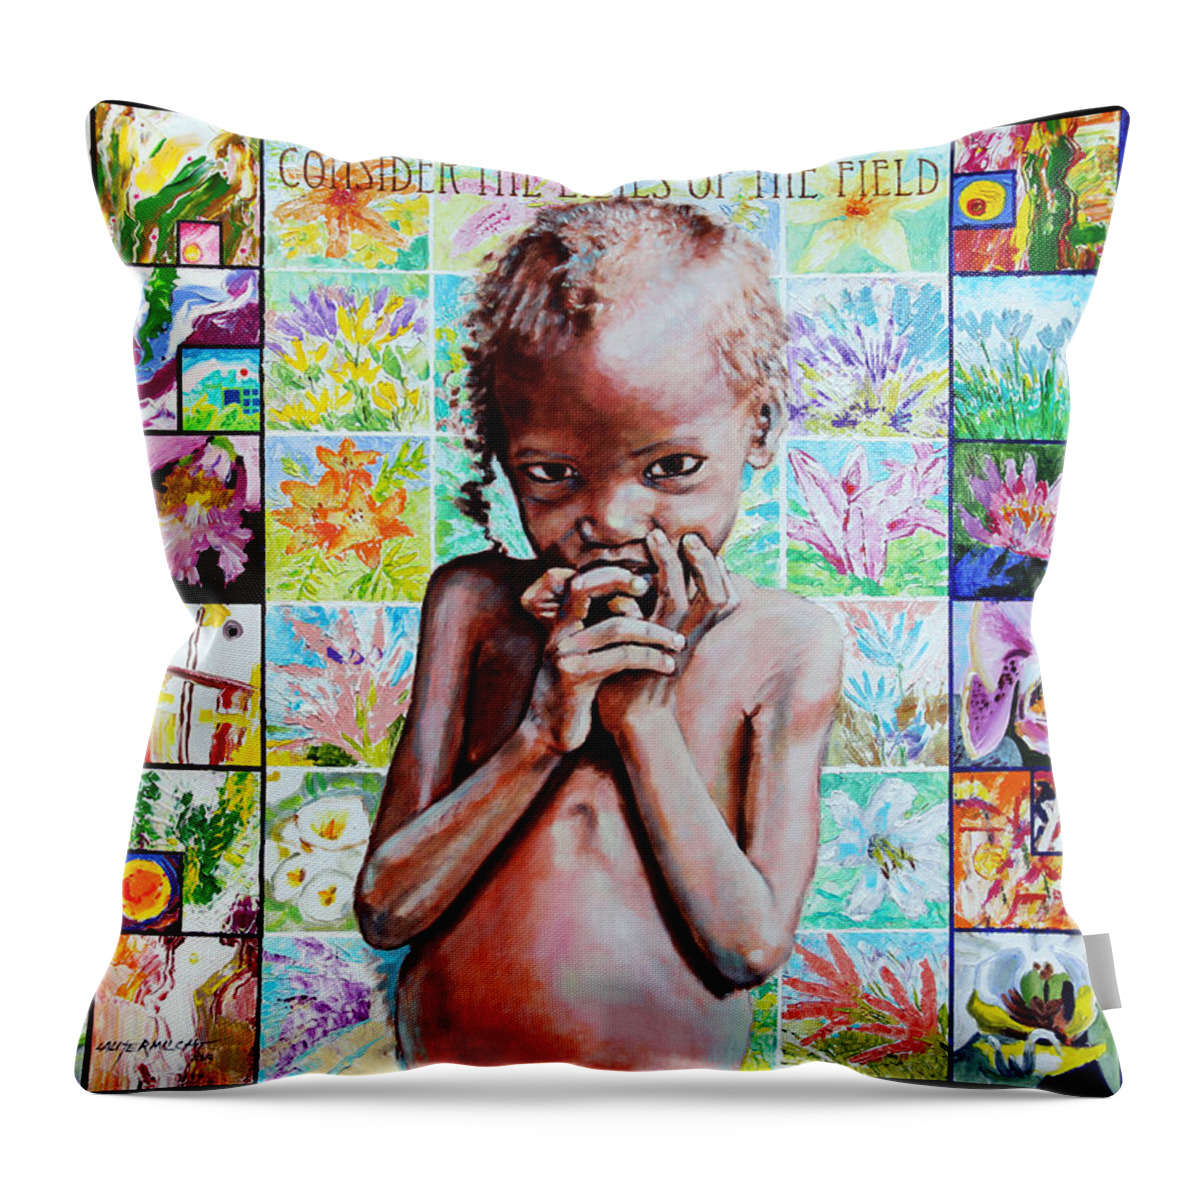 Child Throw Pillow featuring the painting Consider The Lilies of The Field by John Lautermilch